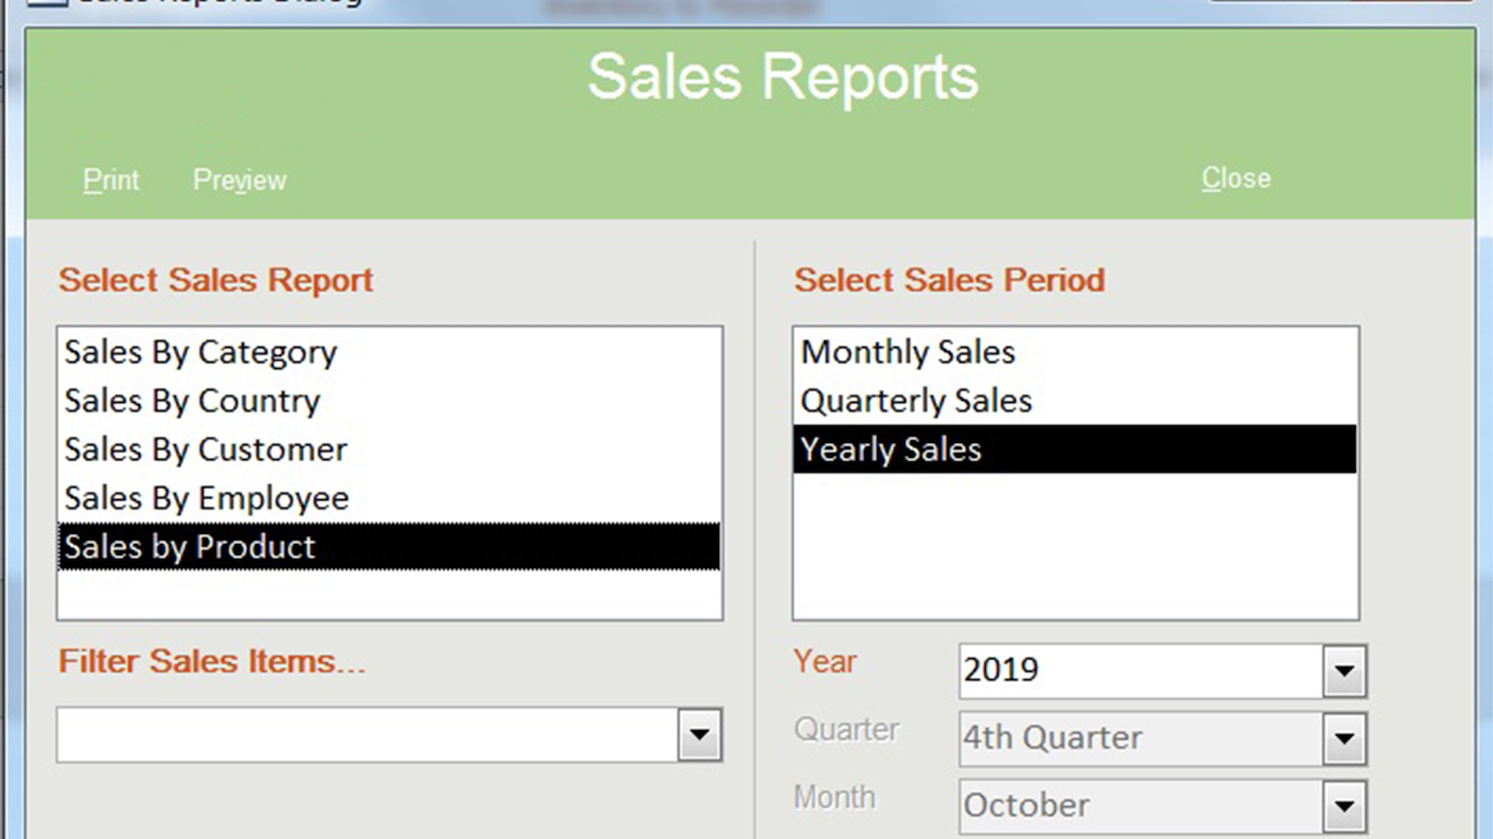 Custom sales report page for a Retail Sales Company, is an example of MS Access development